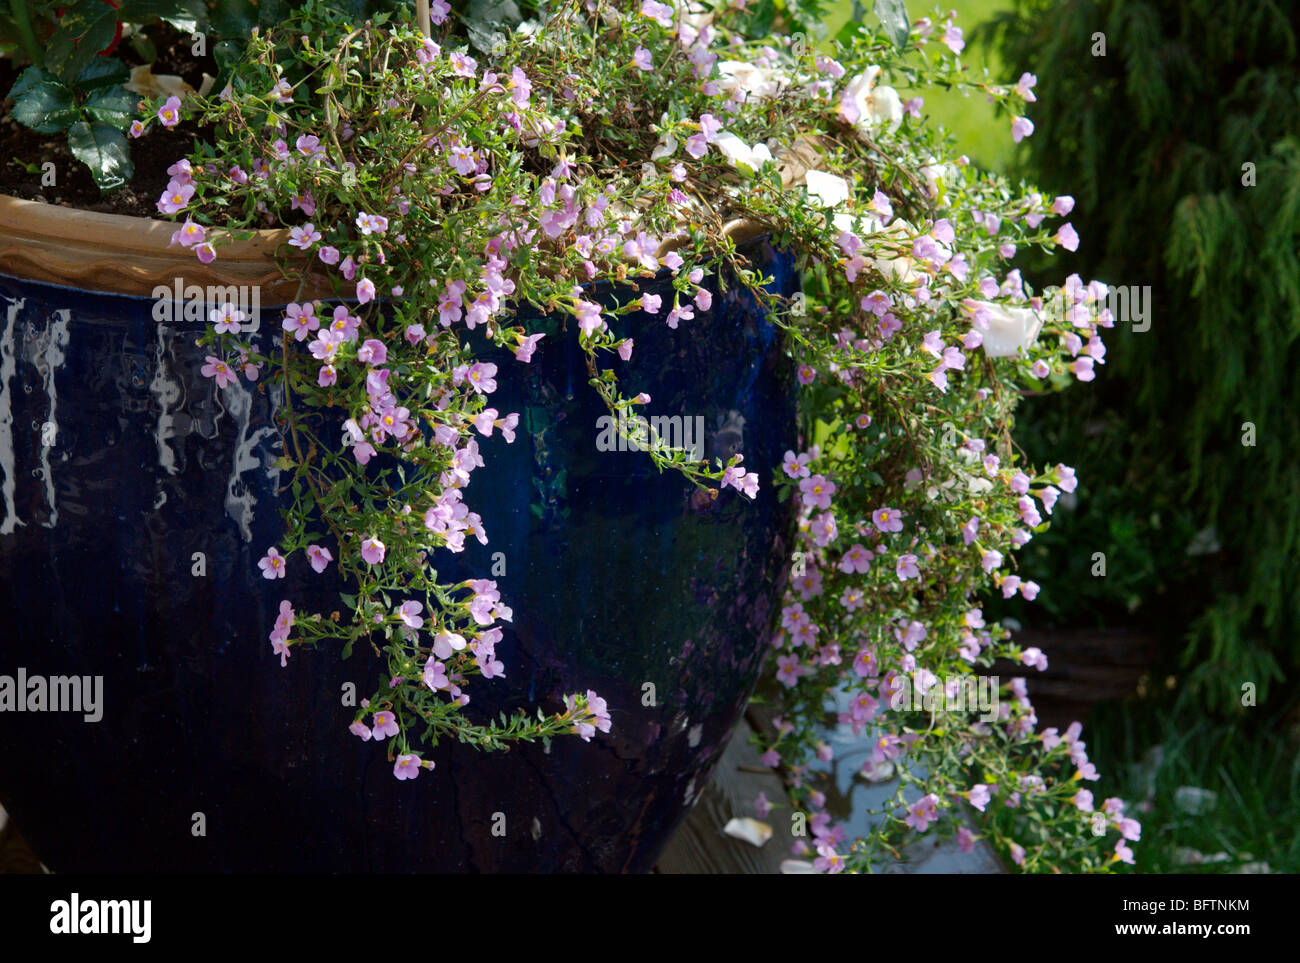 Tiny pink flowers (sutera / bacopa grandiflora) cascading over container edge Stock Photo